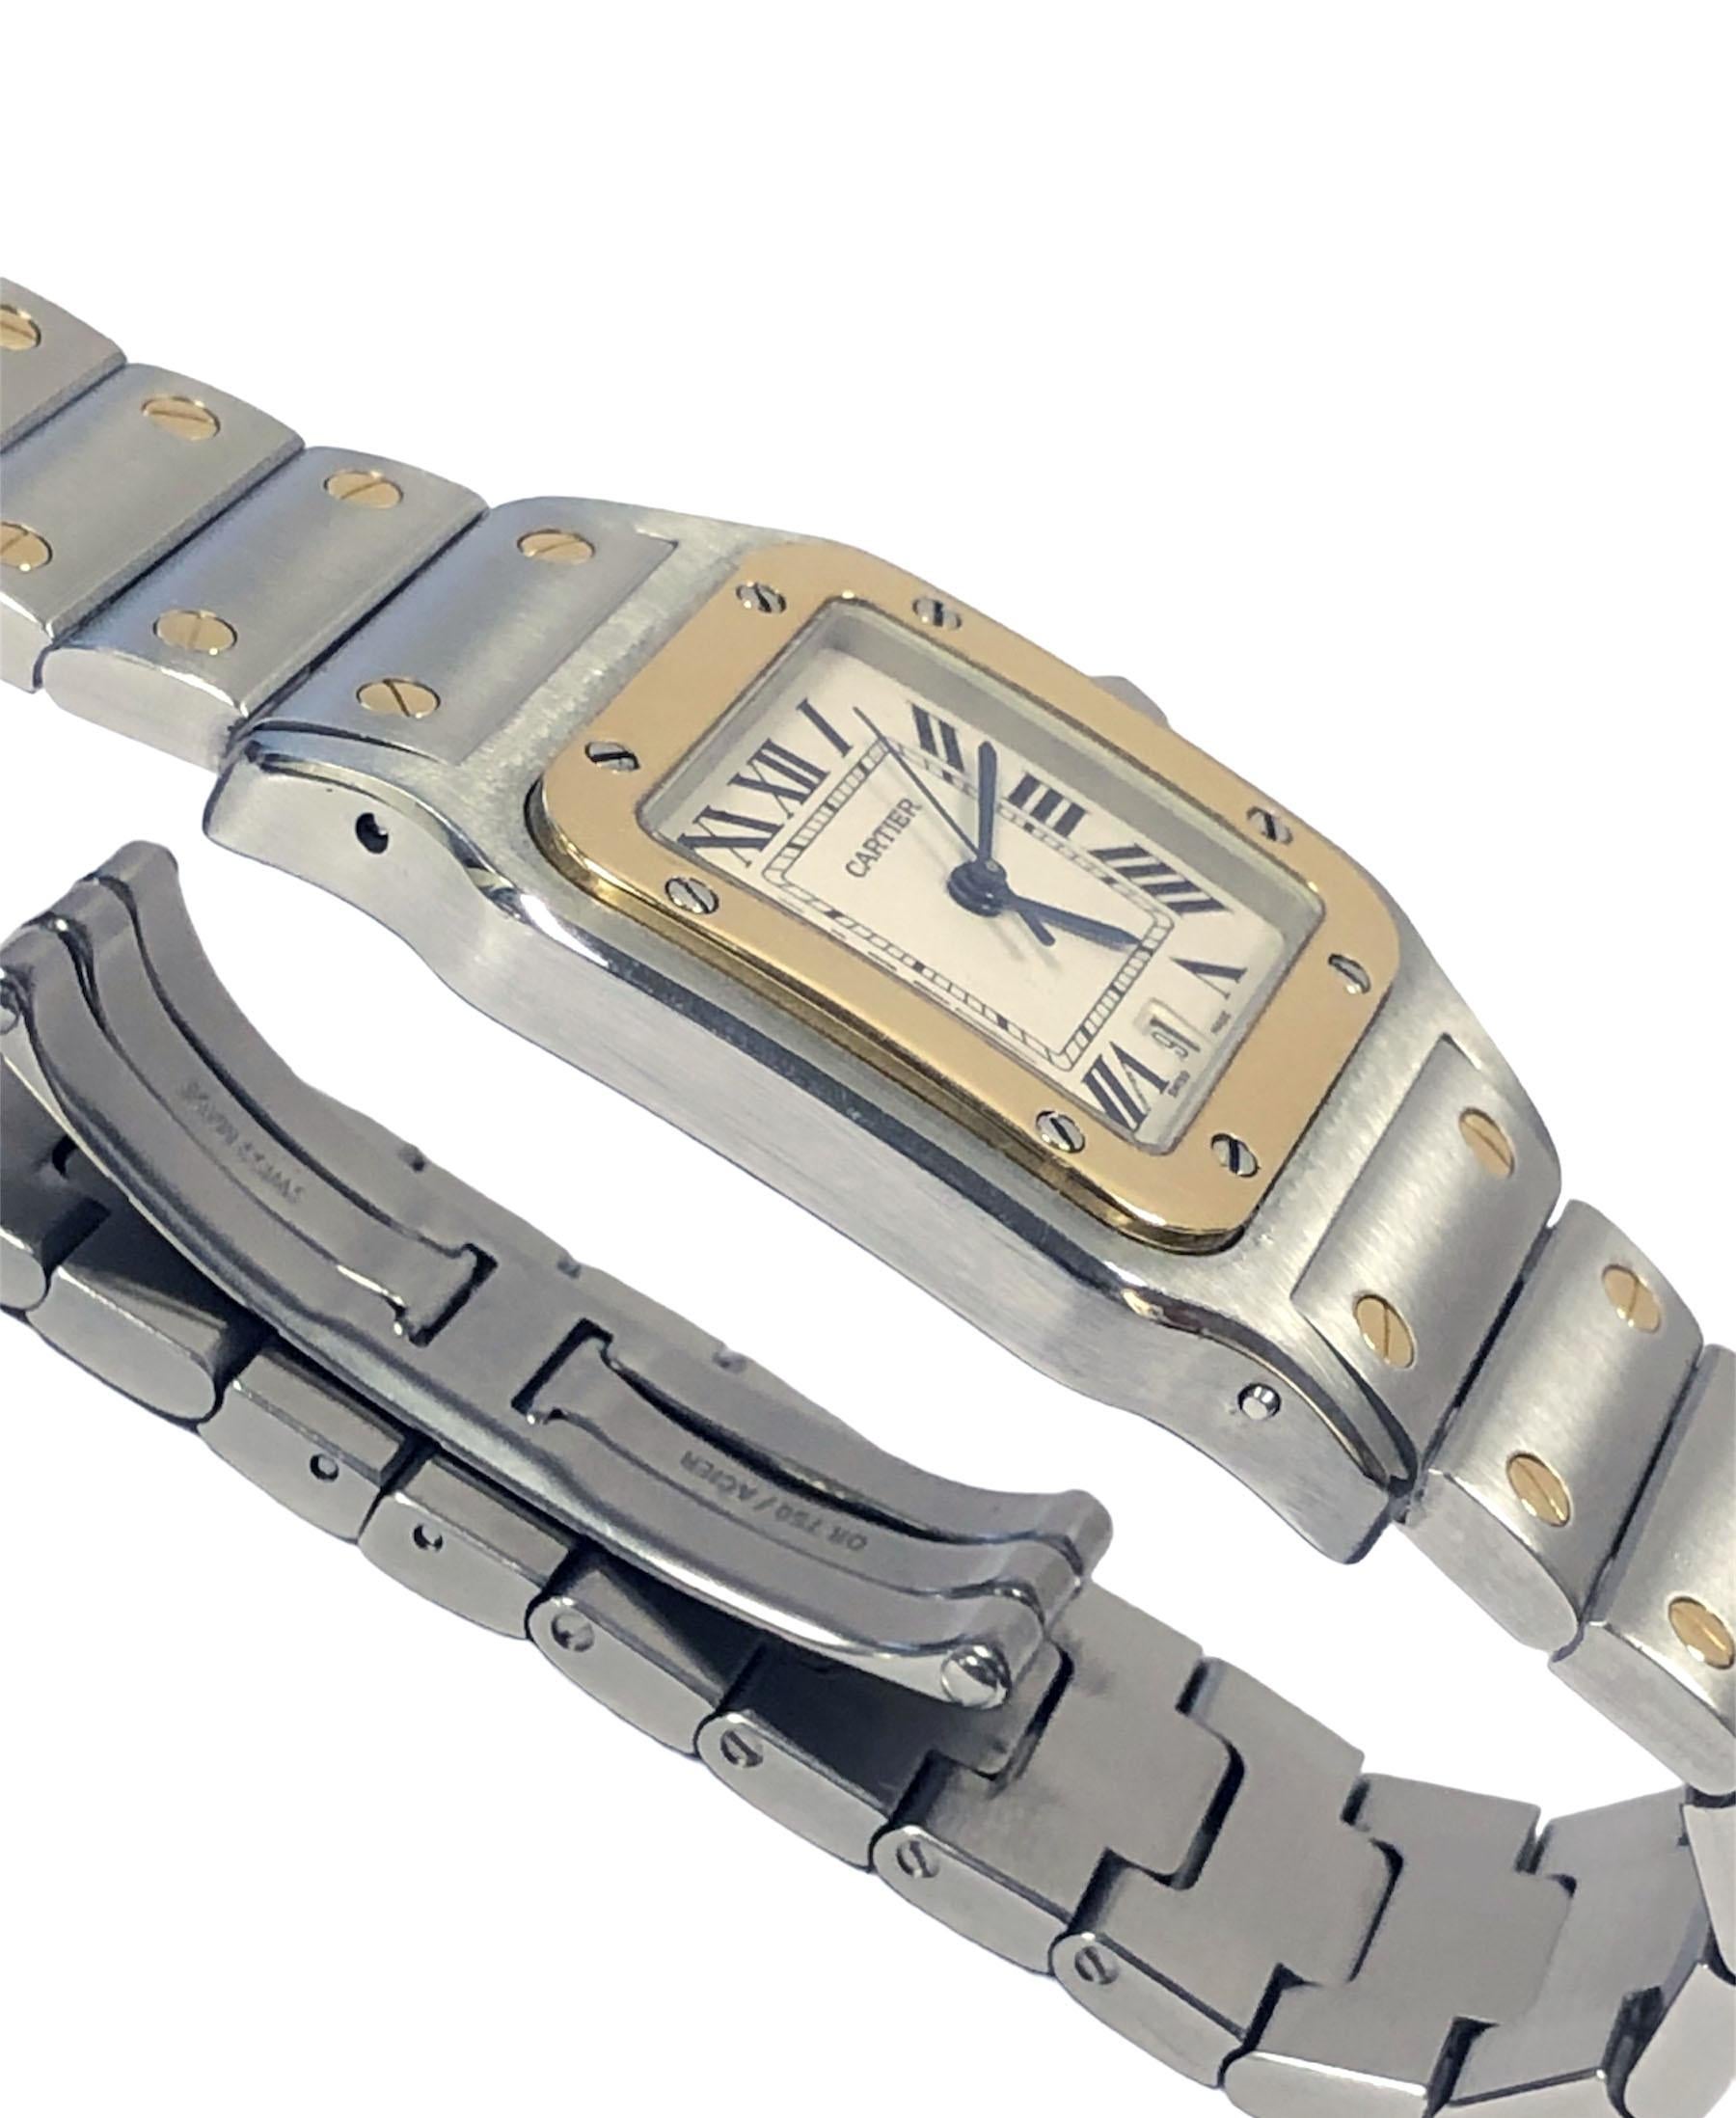 Circa 2012 Cartier Santos Galbee 1566 Wrist Watch 29 X 29 M.M Stainless Steel case with 18K Yellow Gold Bezel and a Sapphire Crown, Quartz Movement, White Dial with Black Roman Numerals a Calendar window at the 6 position and a sweep seconds Hand. 